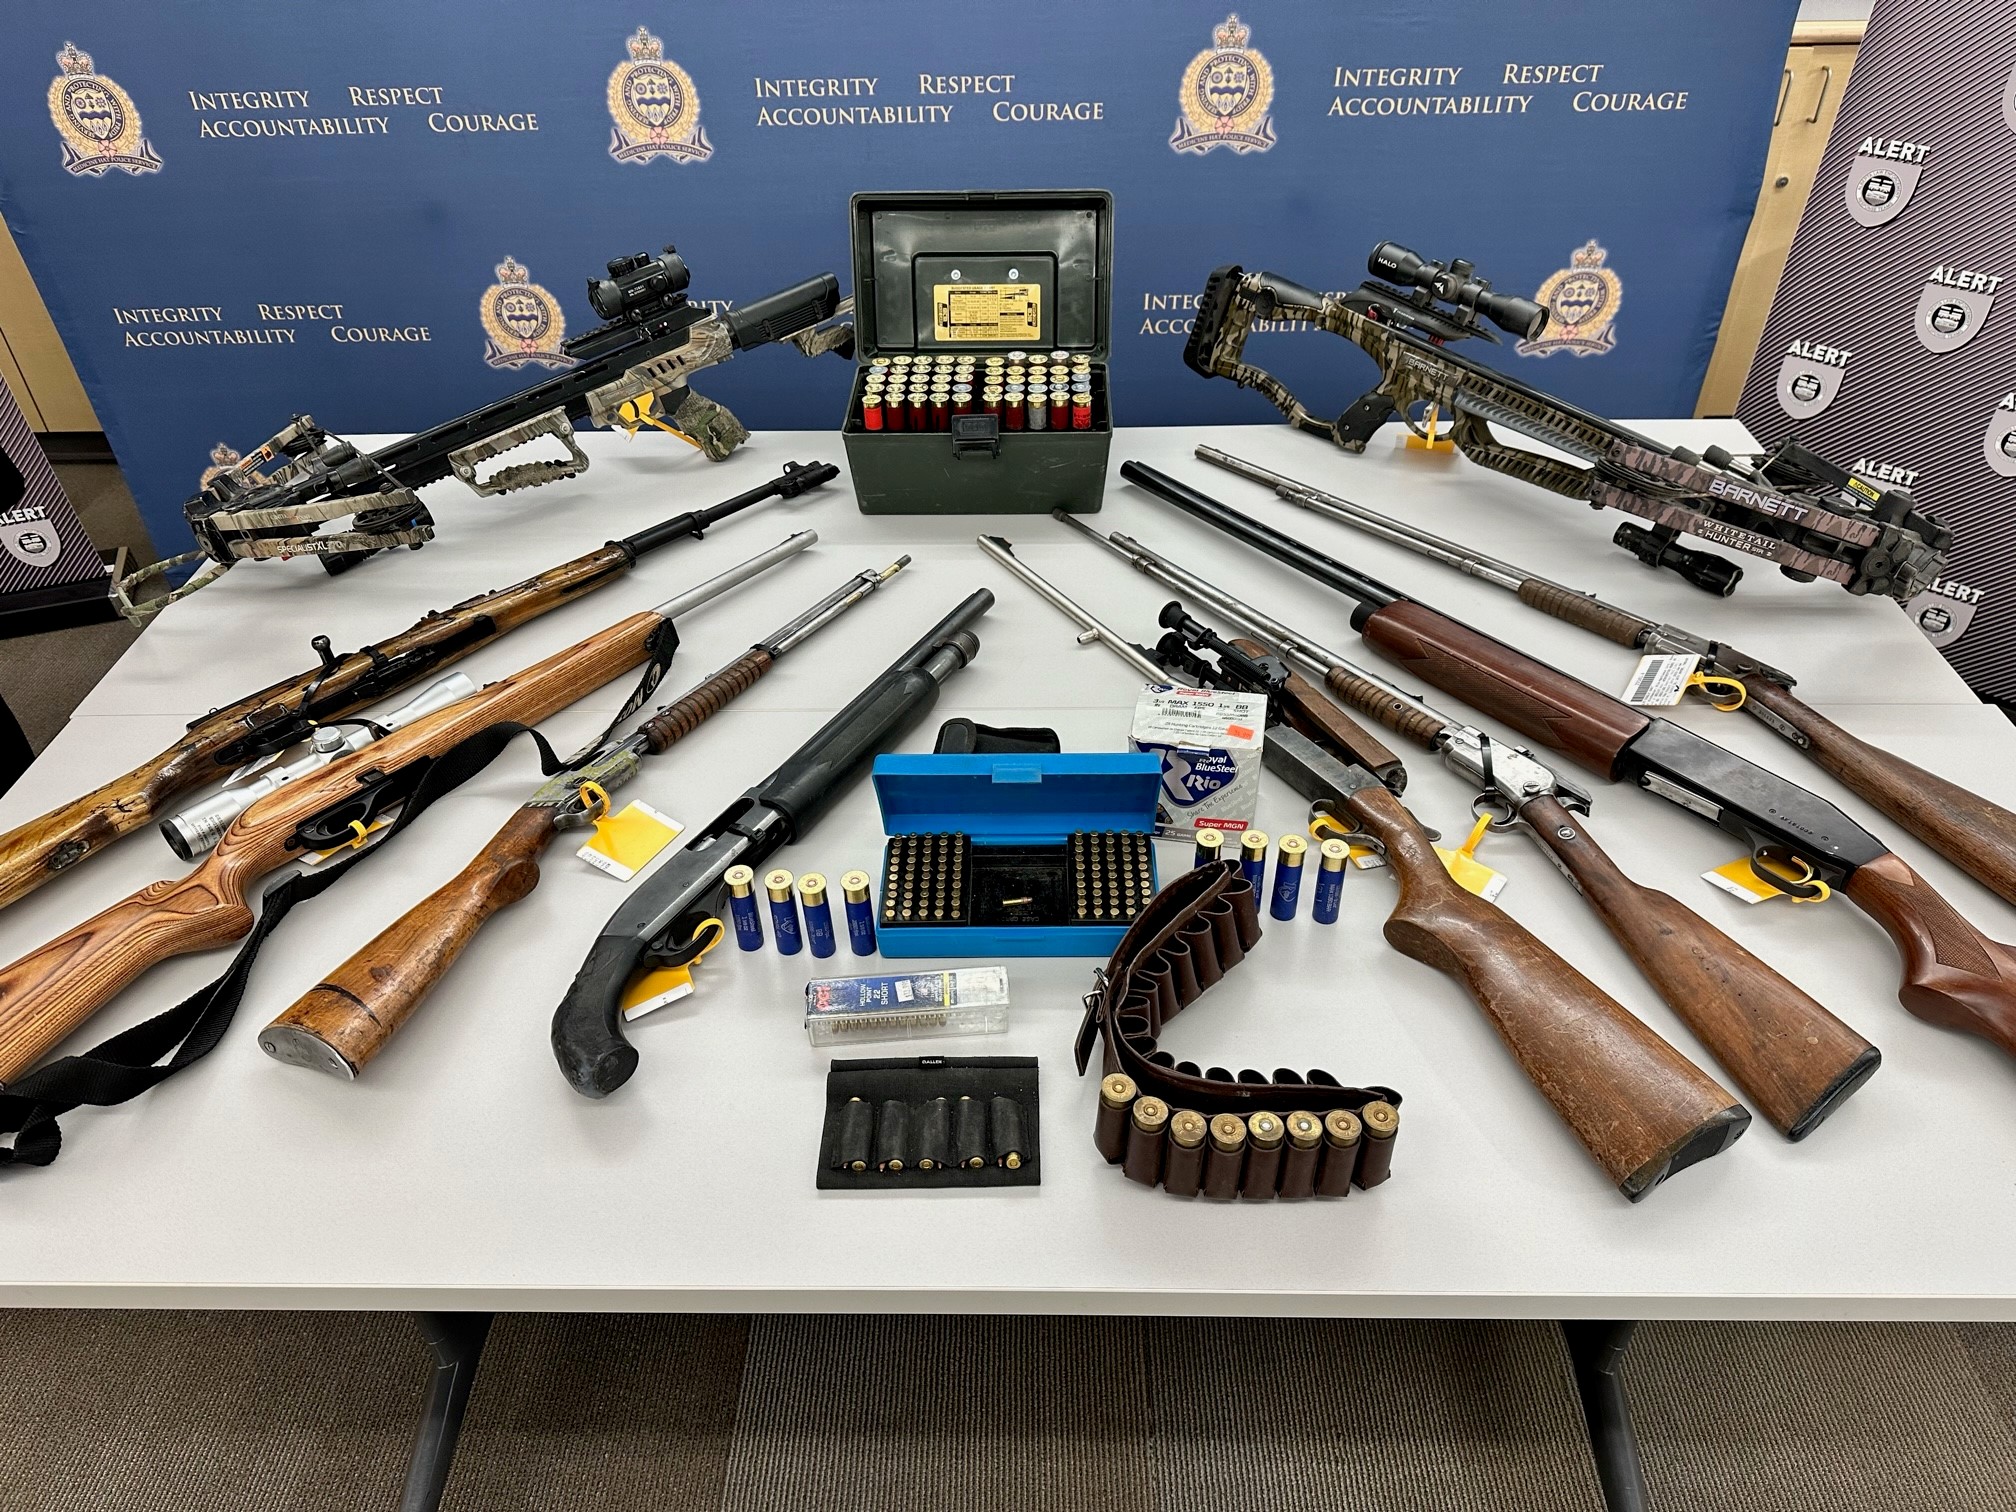 Firearms, stolen property recovered in southeast Alberta